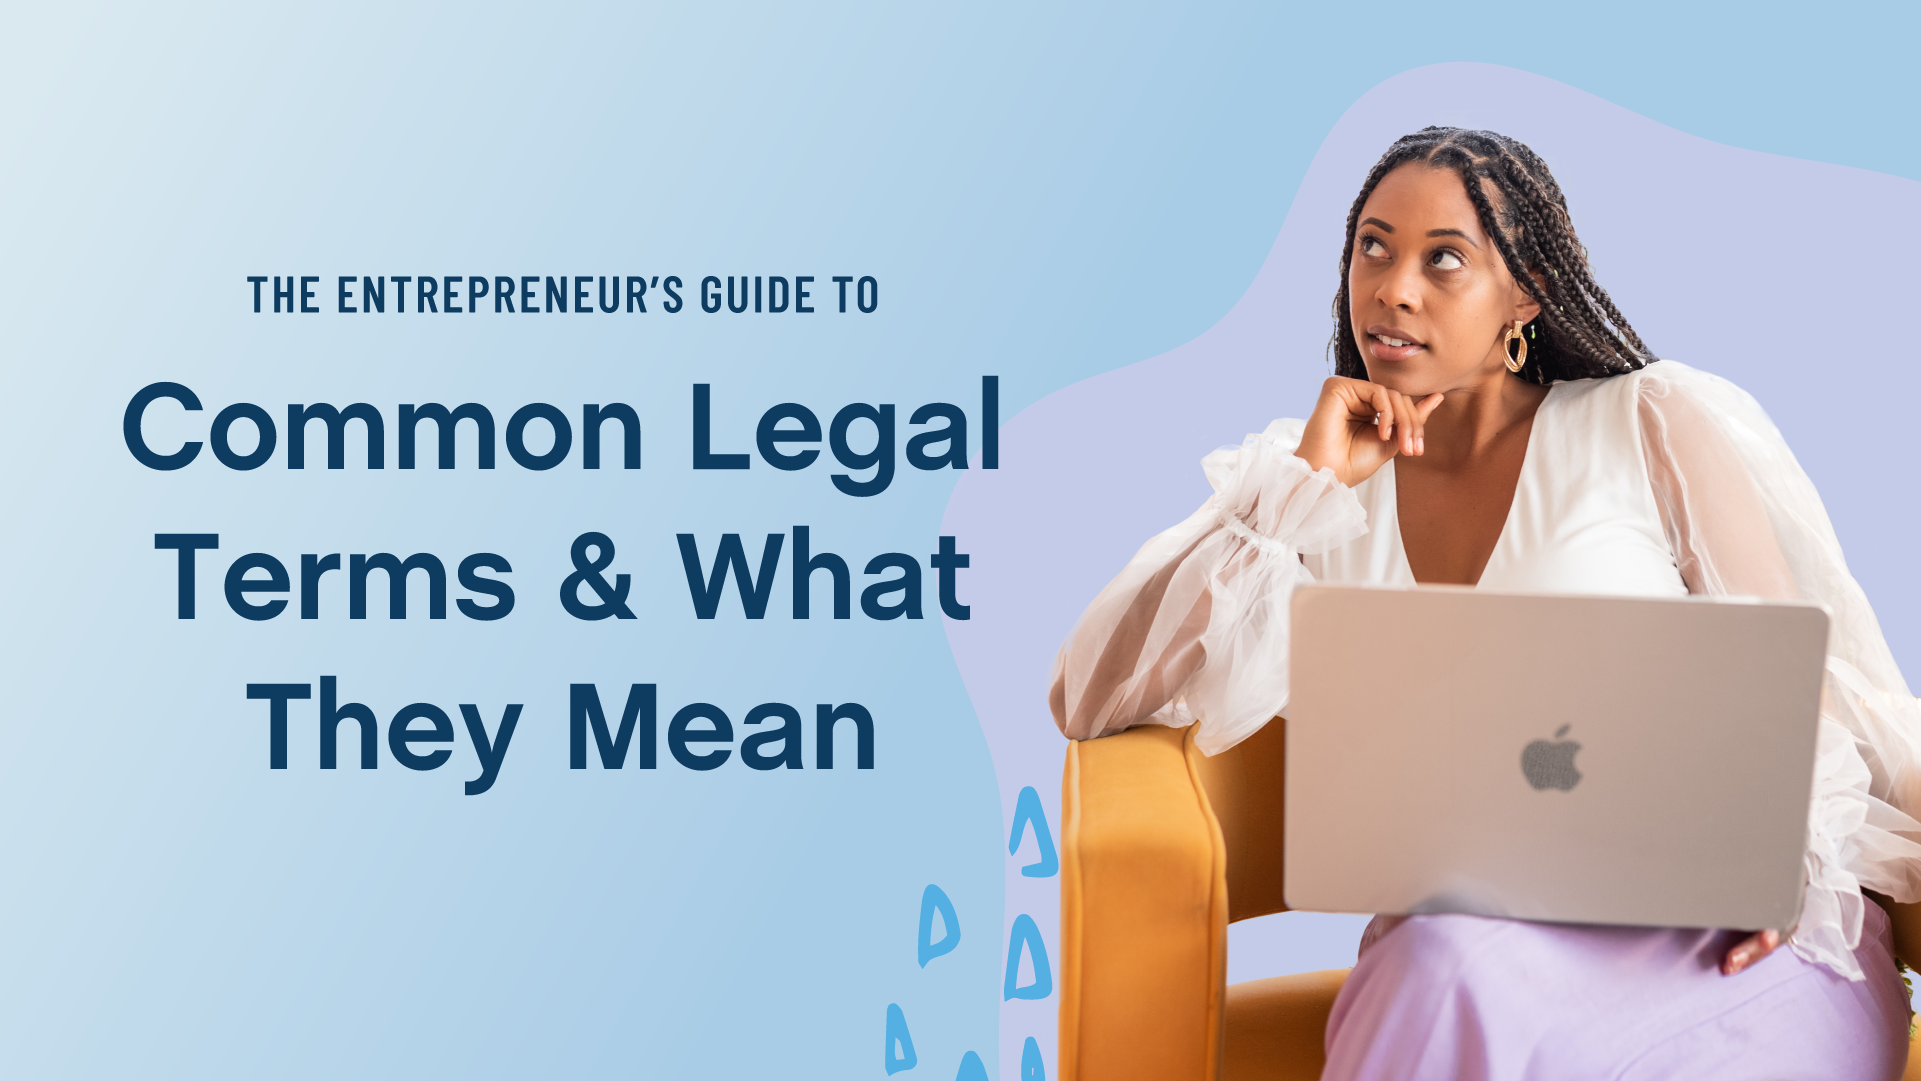 Common Legal Terms & What They Mean